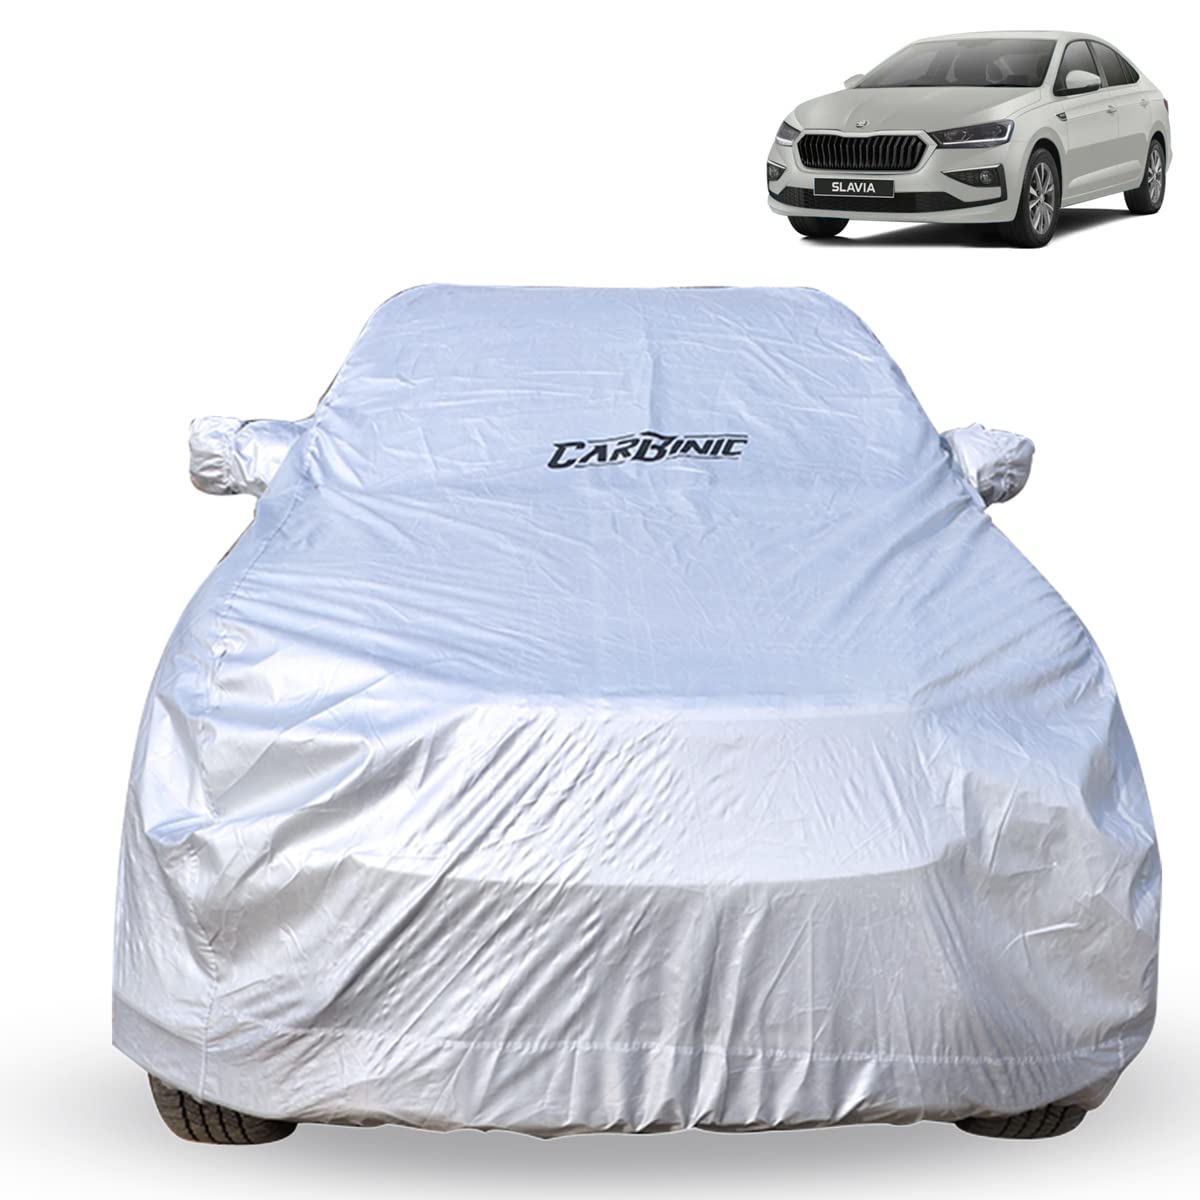 CARBINIC Car Body Cover for Skoda Slavia 2022 | Water Resistant, UV Protection Car Cover | Scratchproof Body Shield | Dustproof All-Weather Cover | Mirror Pocket & Antenna | Car Accessories, Silver